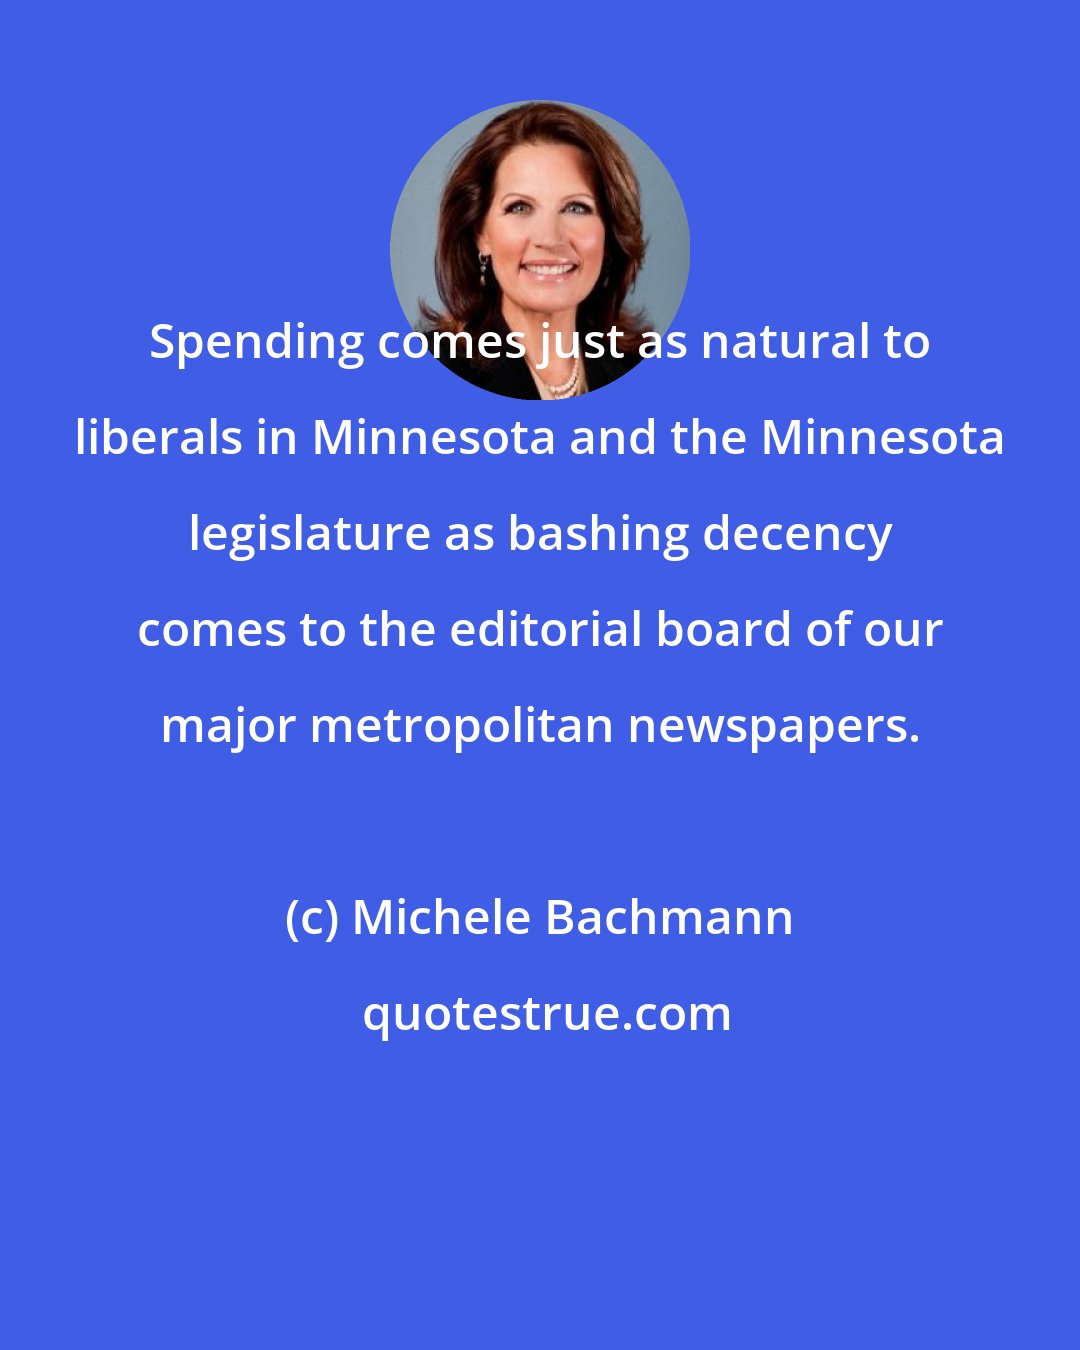 Michele Bachmann: Spending comes just as natural to liberals in Minnesota and the Minnesota legislature as bashing decency comes to the editorial board of our major metropolitan newspapers.